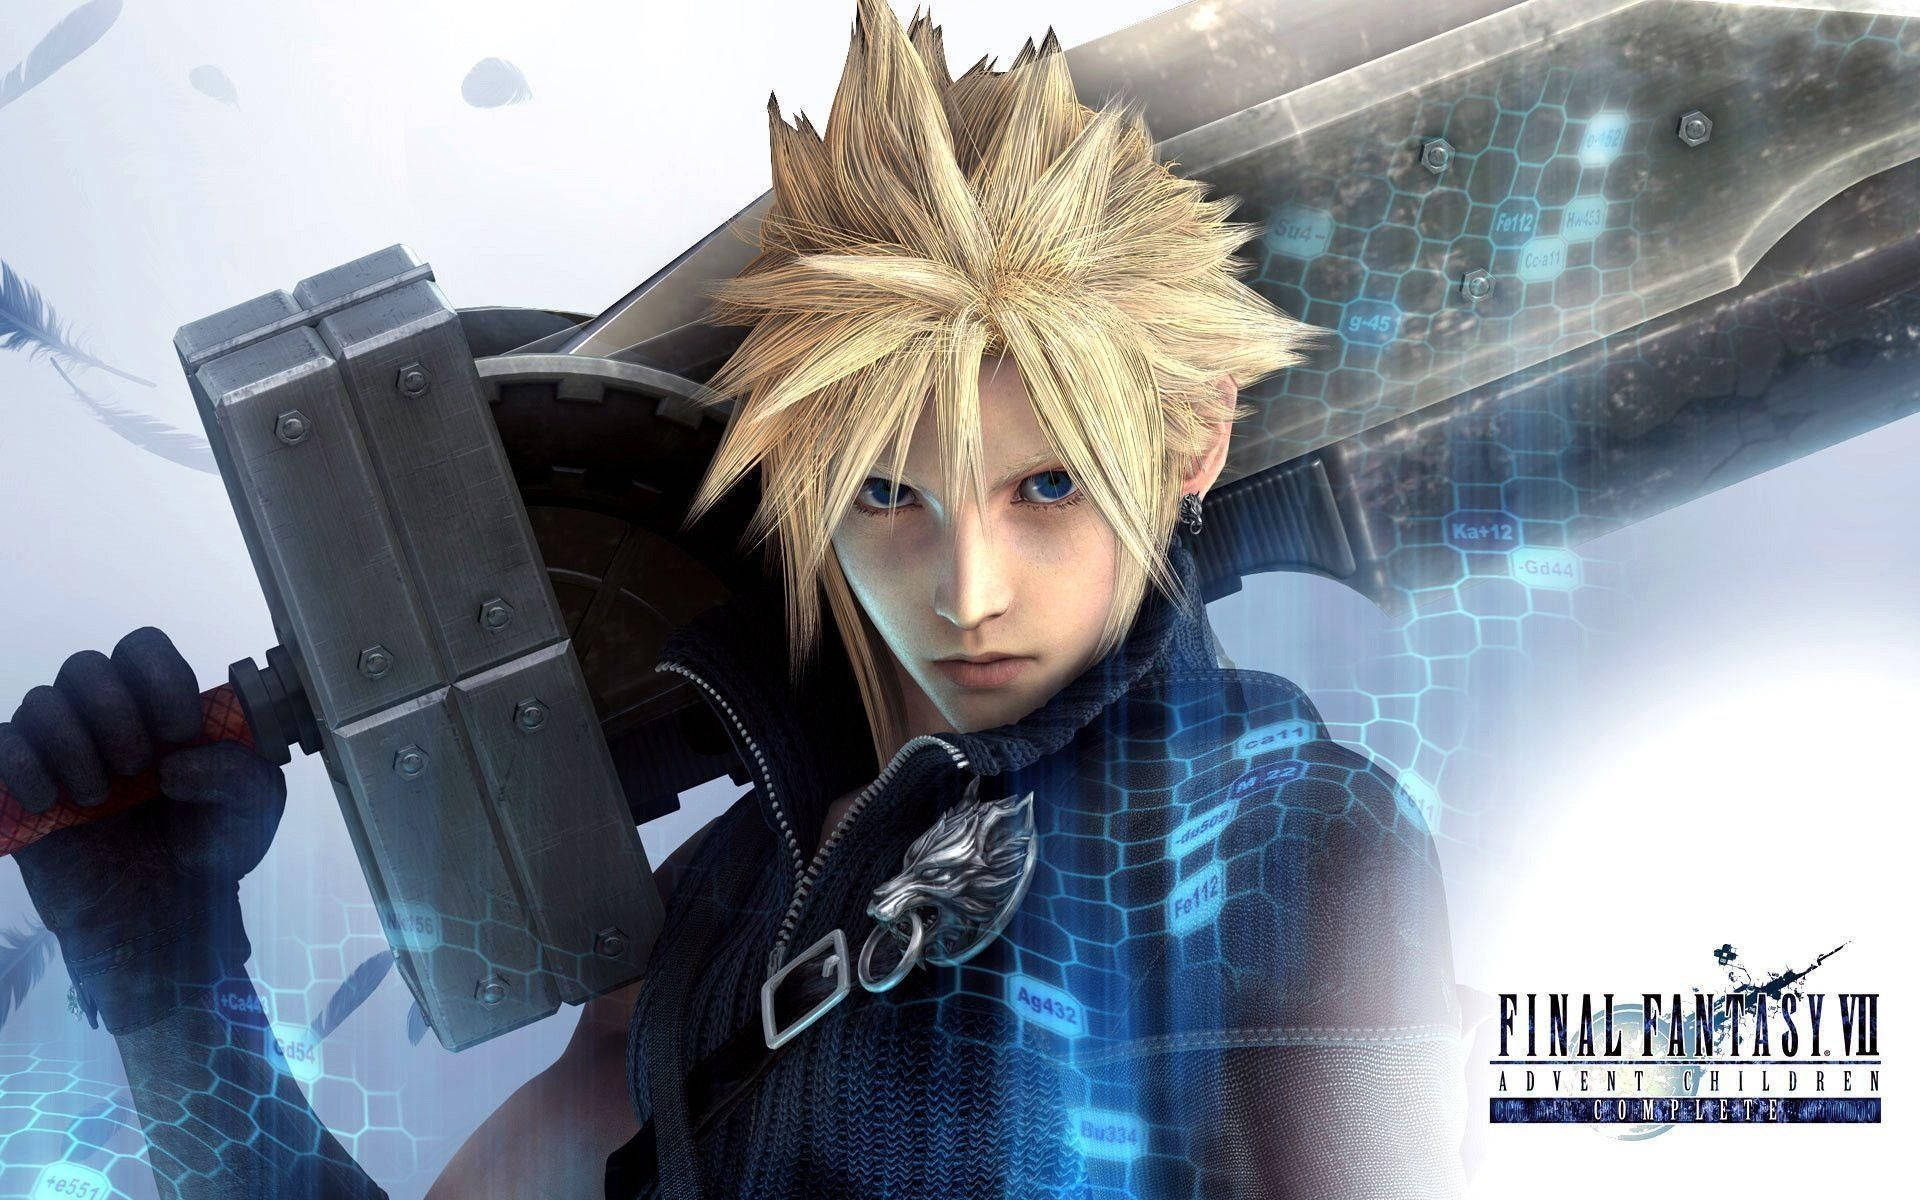 “Fly through the Clouds with Cloud from Final Fantasy” Wallpaper